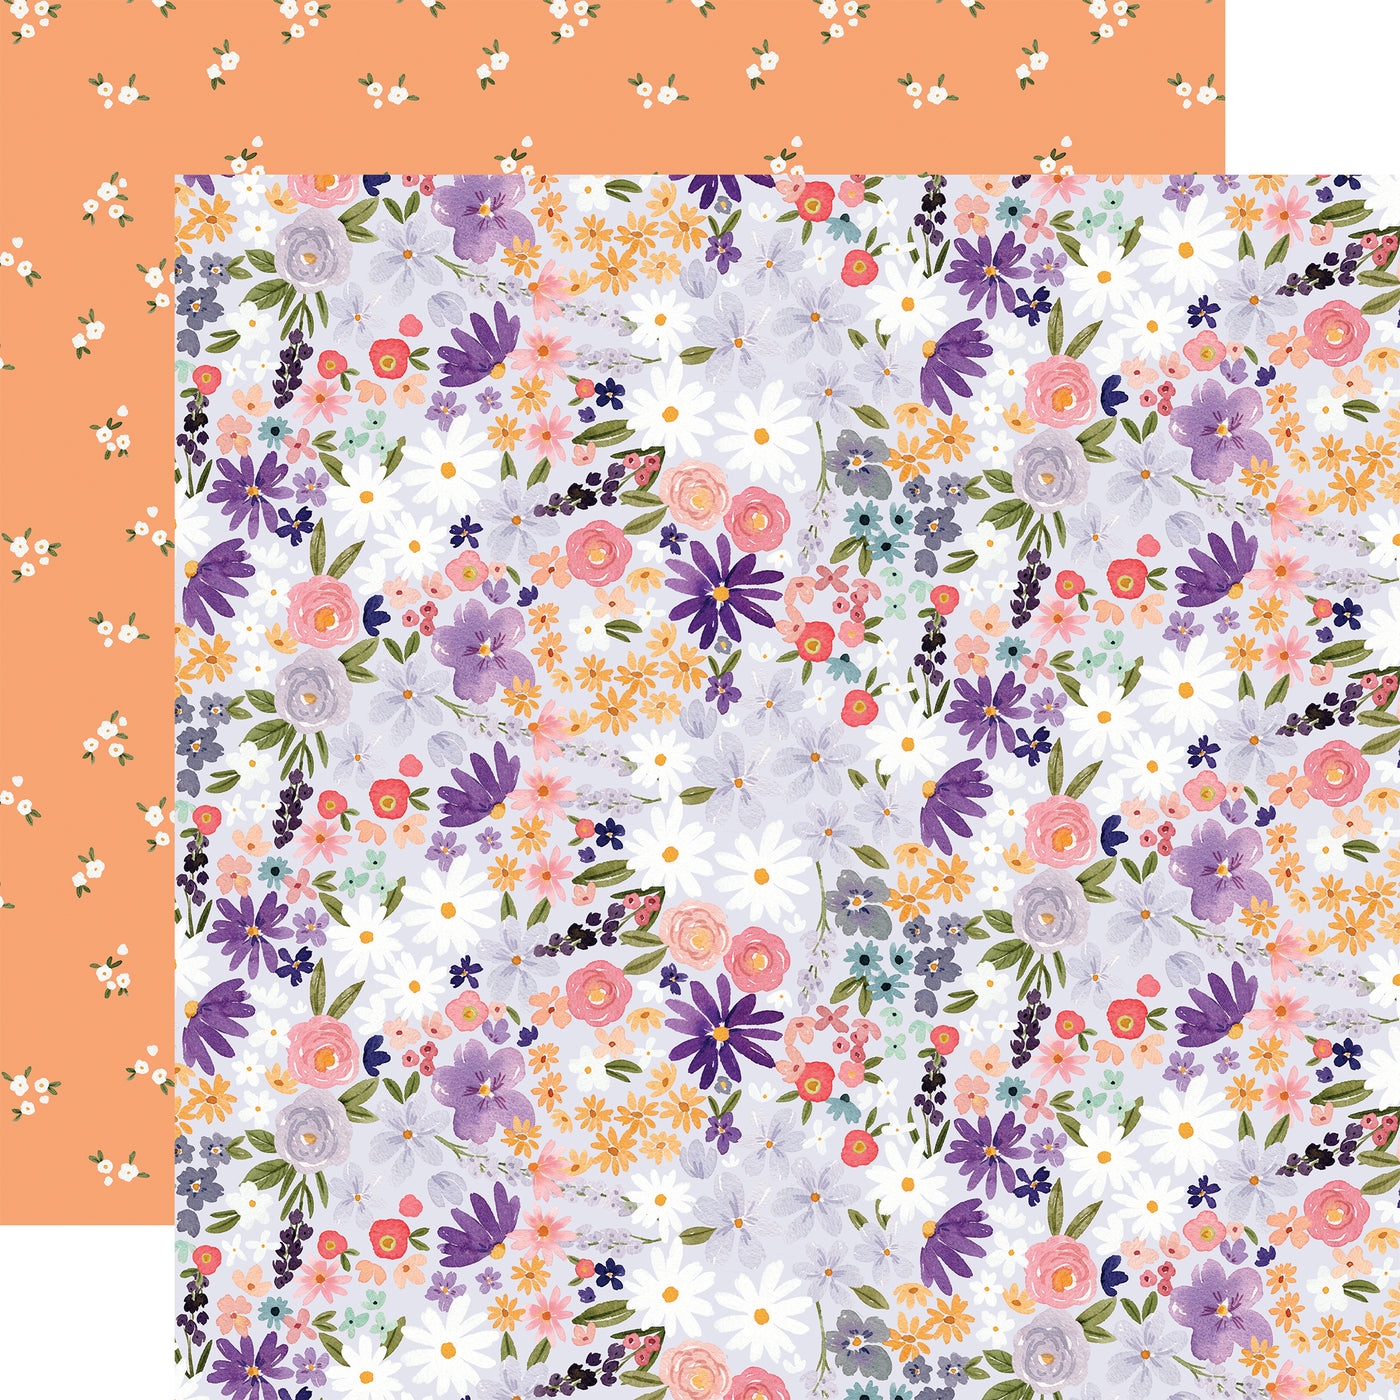 The front side of this paper has a beautiful small floral pattern in shades of pink and purple. The reverse side is a dark peach color with a small white floral pattern.